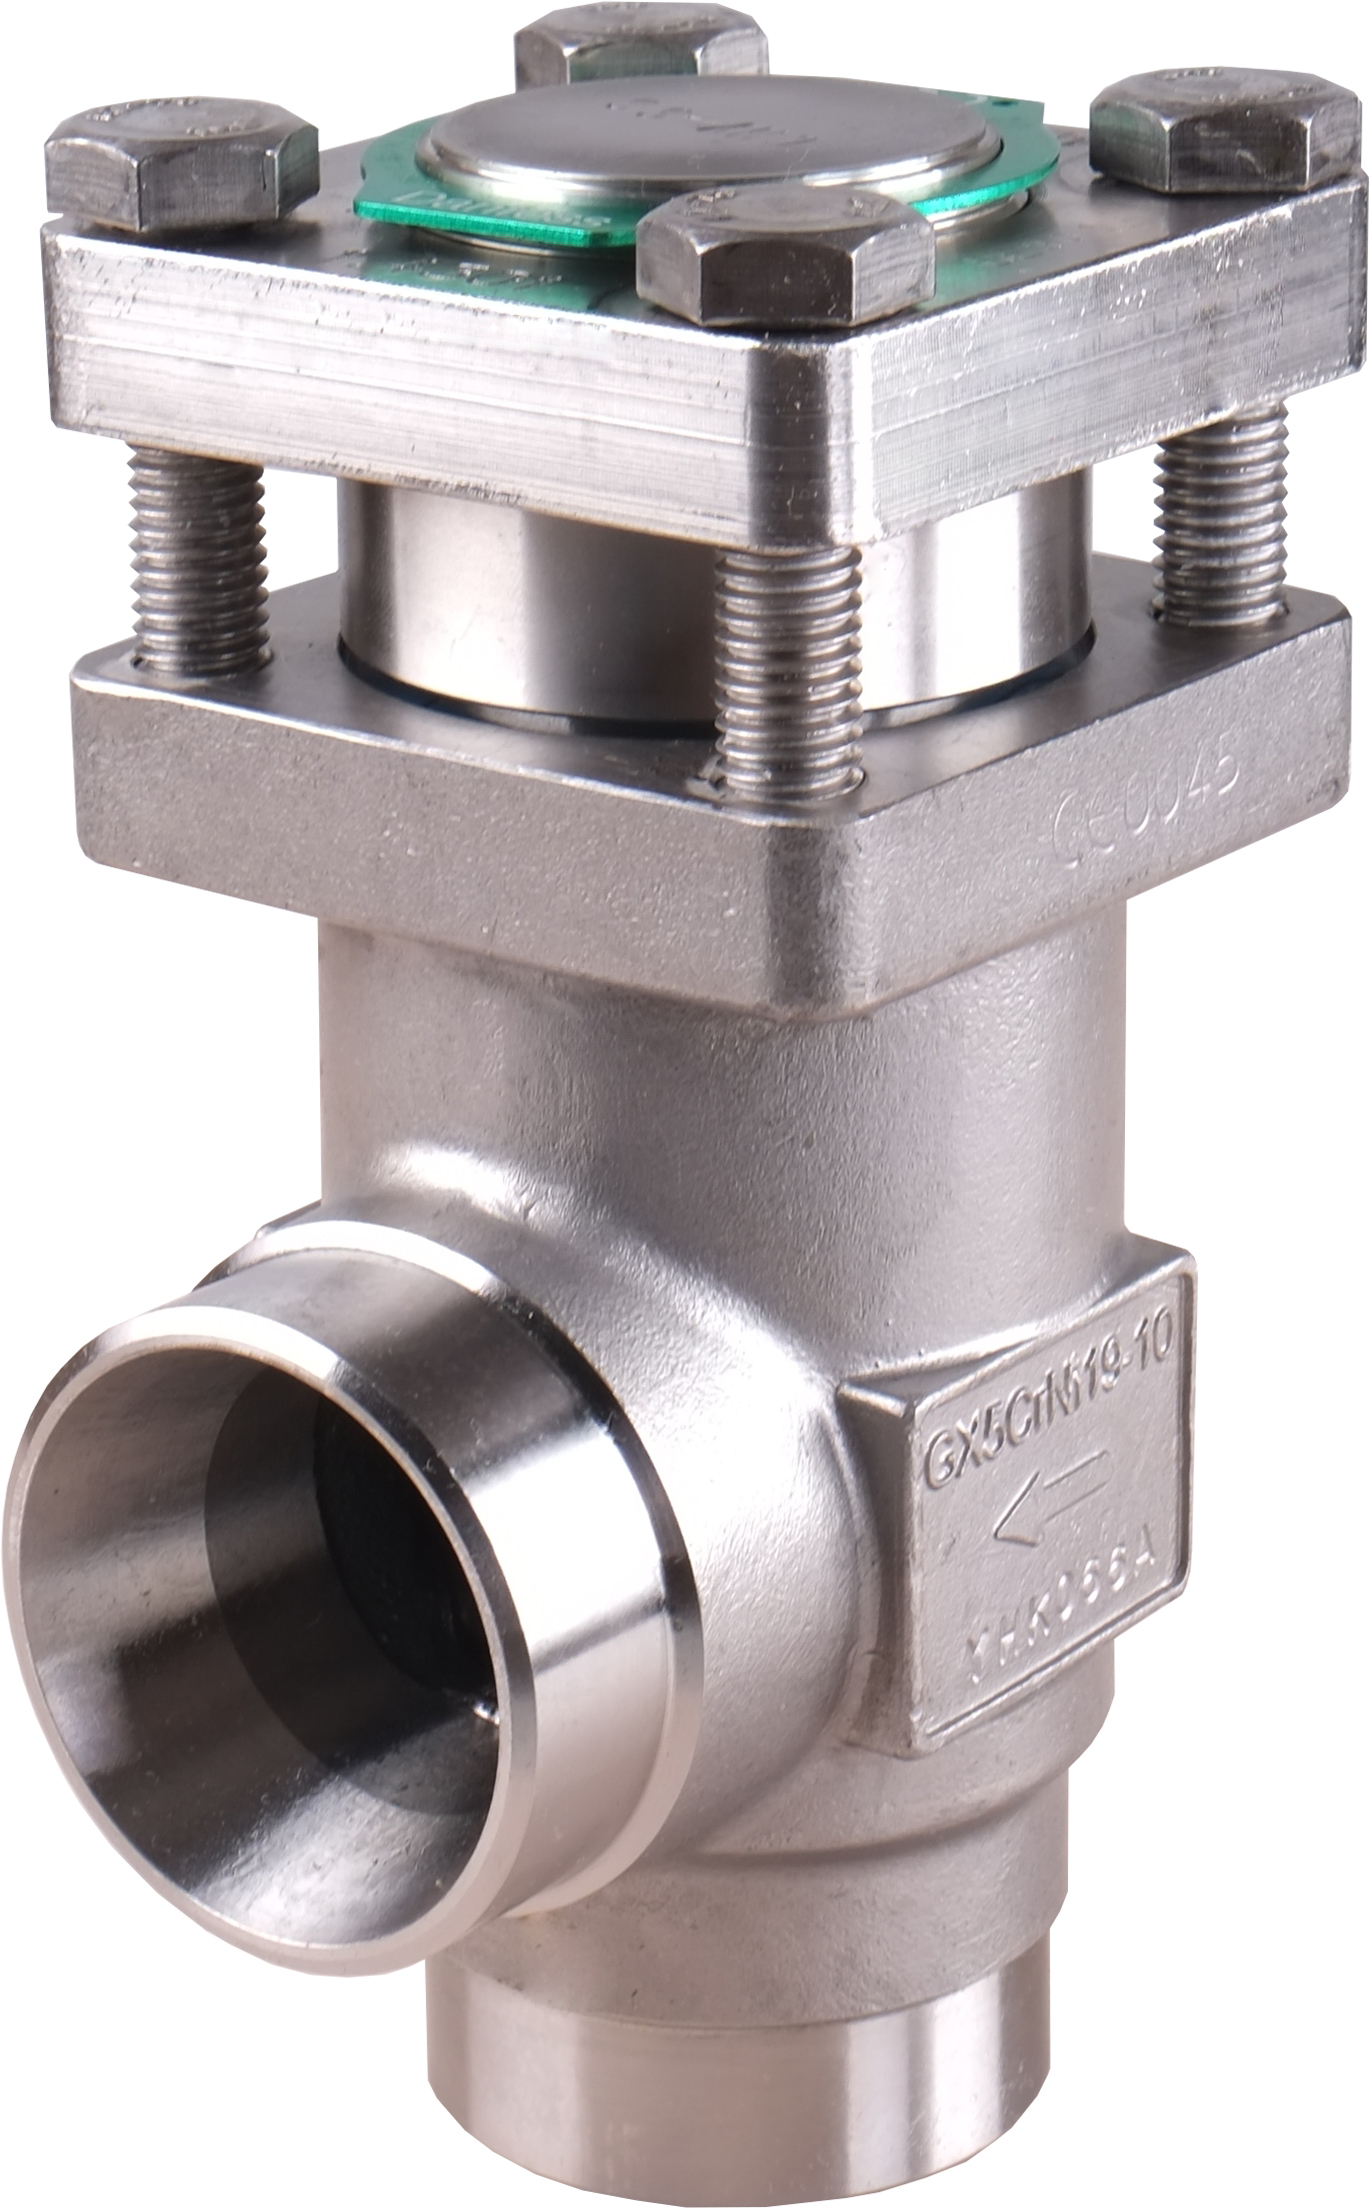 Check valve, CHV-X SS 25, Direction: Angleway, Connection standard: EN 10220